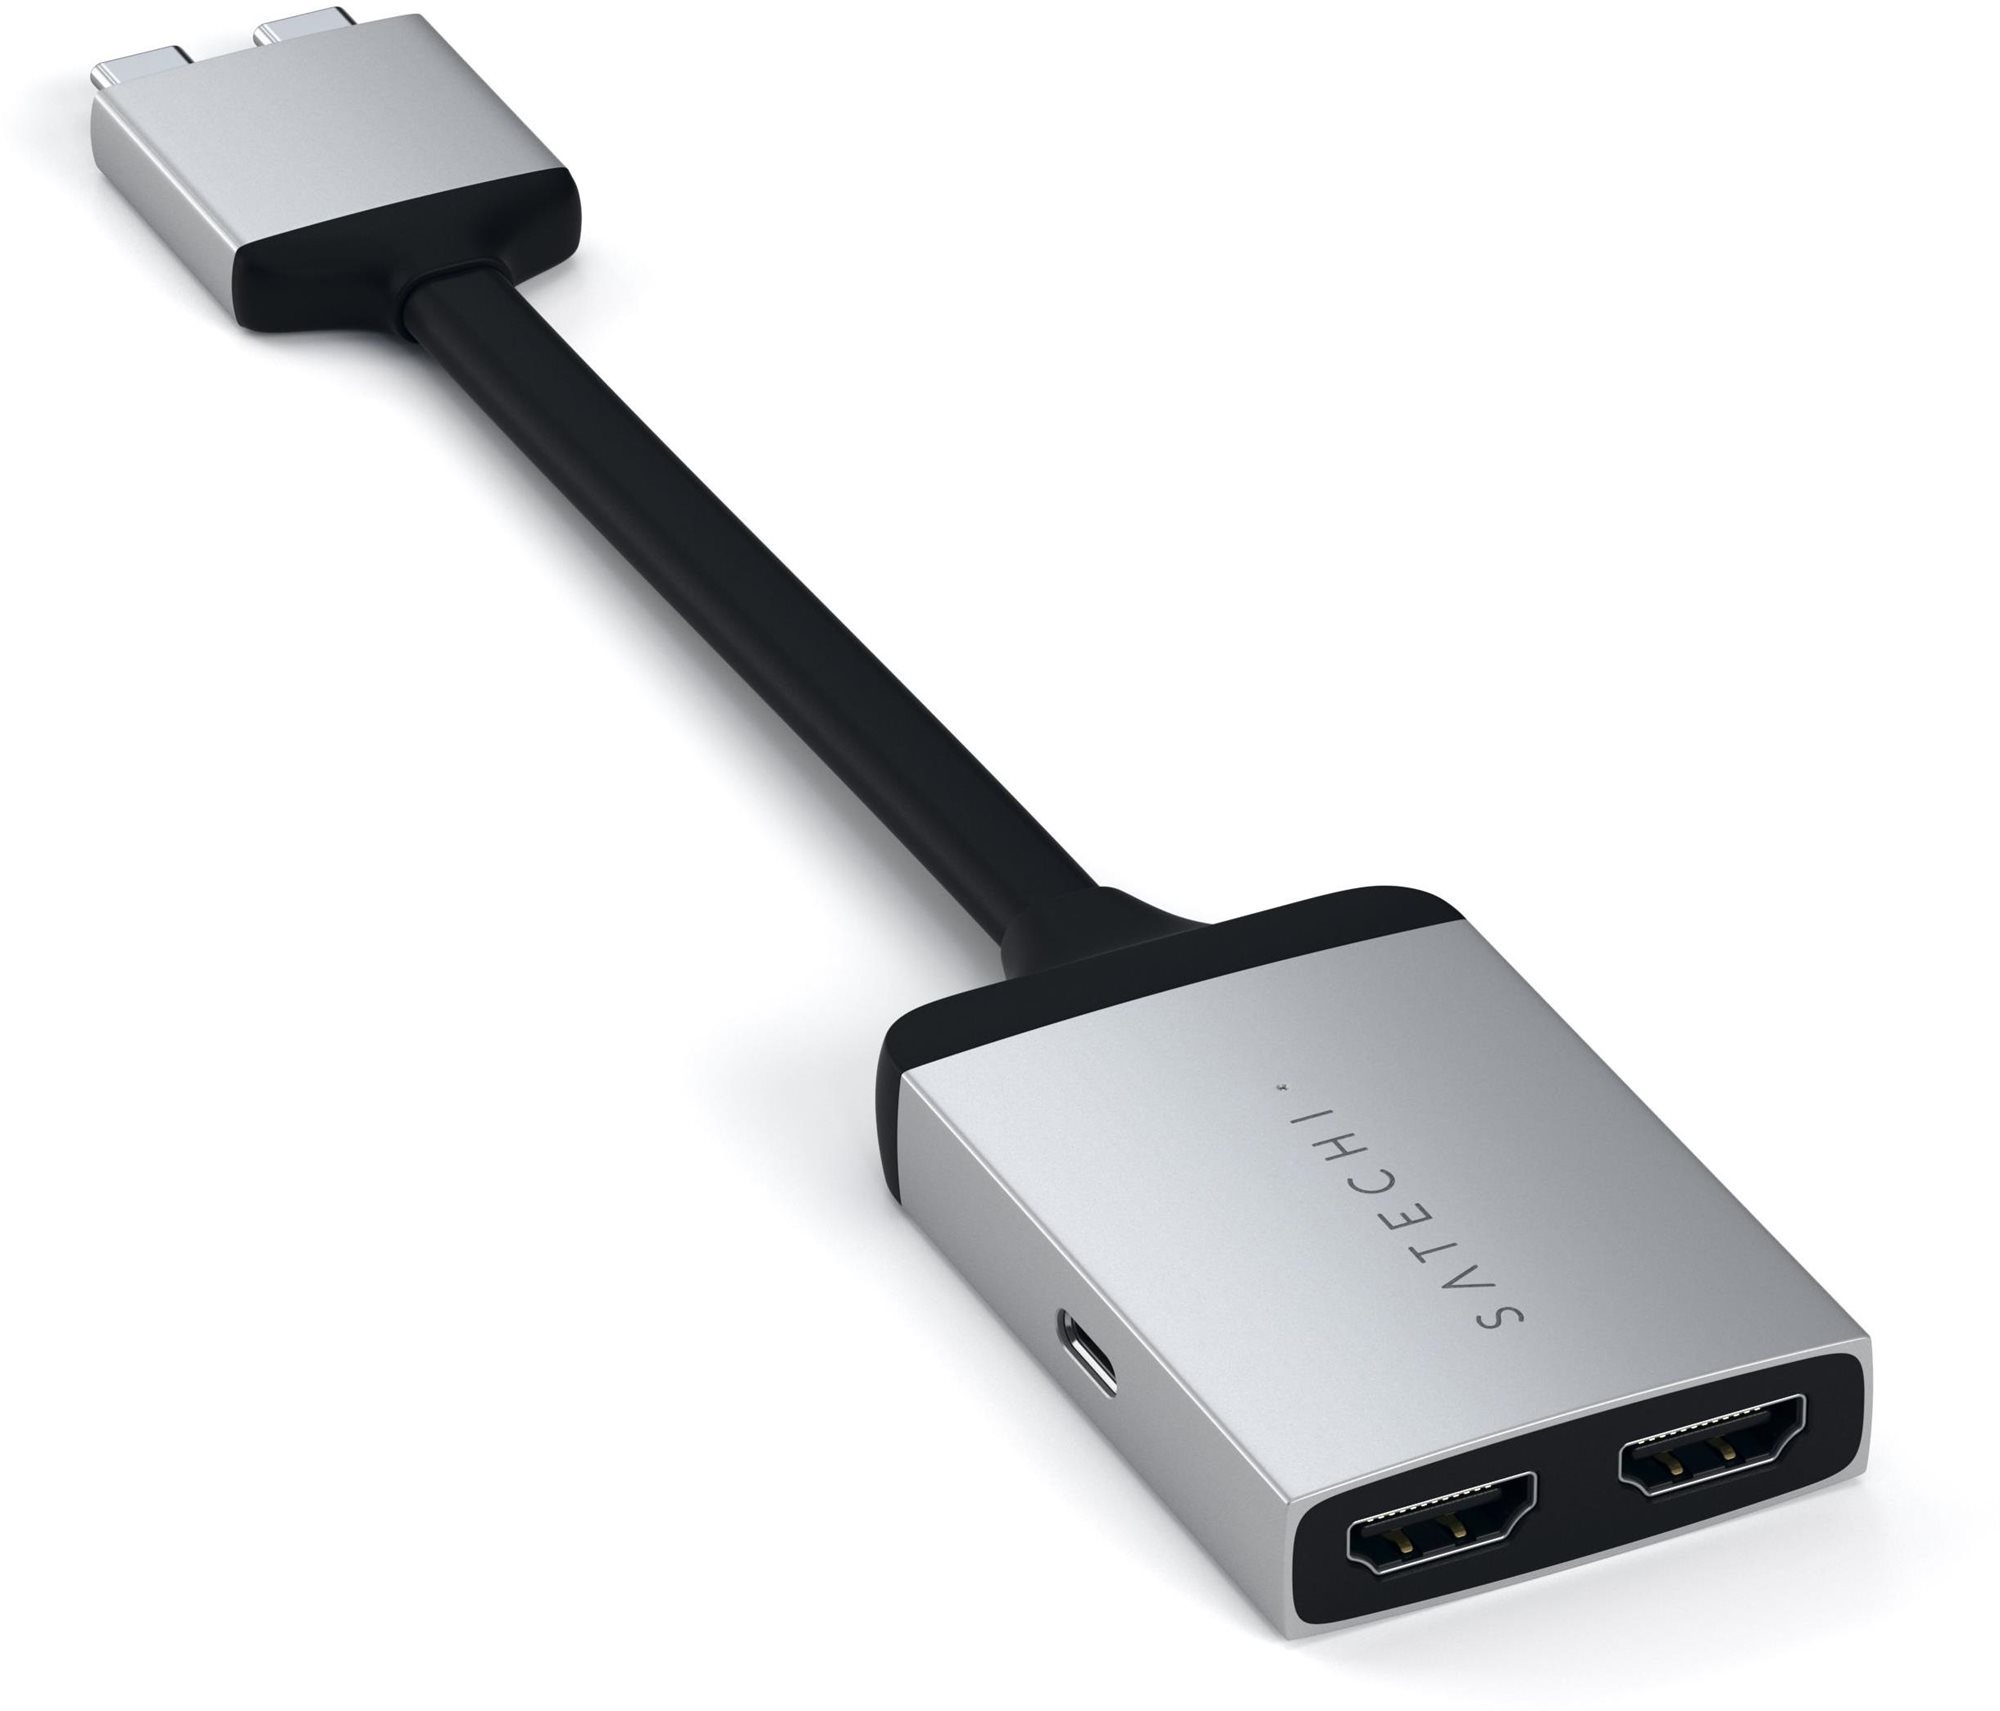 USB Adapter Satechi Type-C Dual HDMI Adapter - Silver